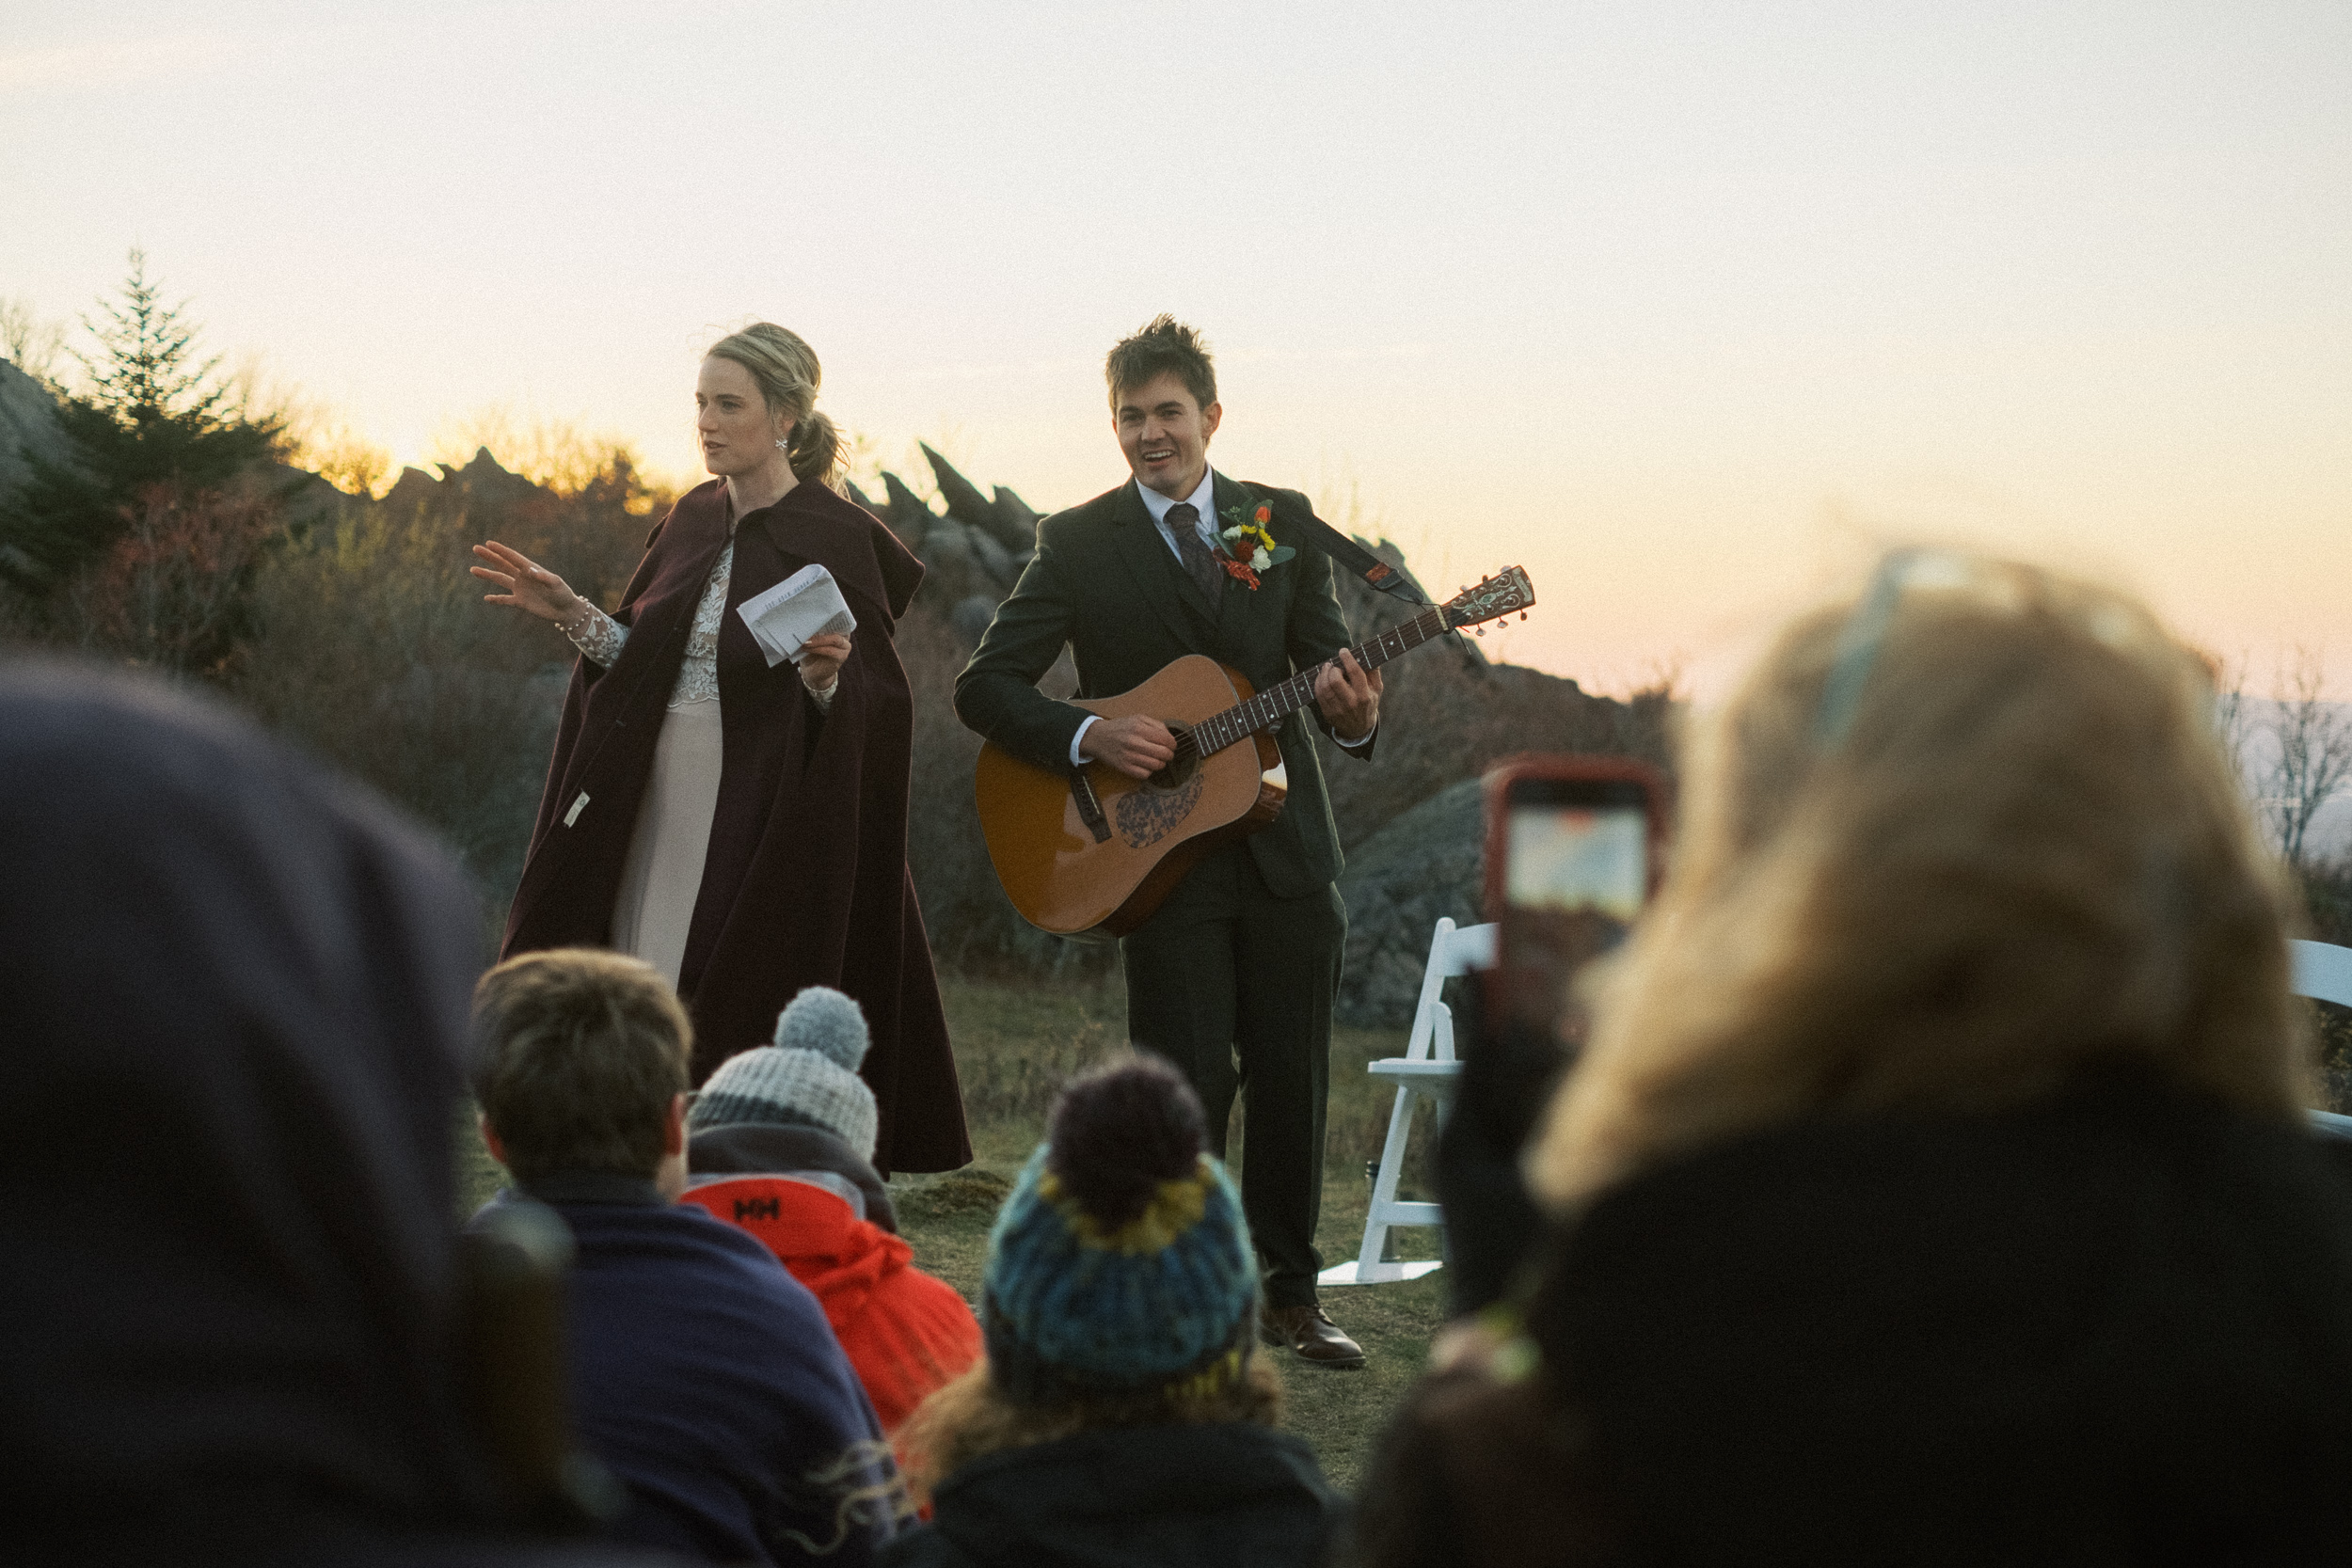 bride and groom play guitar for their own sunrise wedding ceremony at the Grayson Highlands - captured by Virginia documentary wedding photographer - fujifilm classic wedding photo